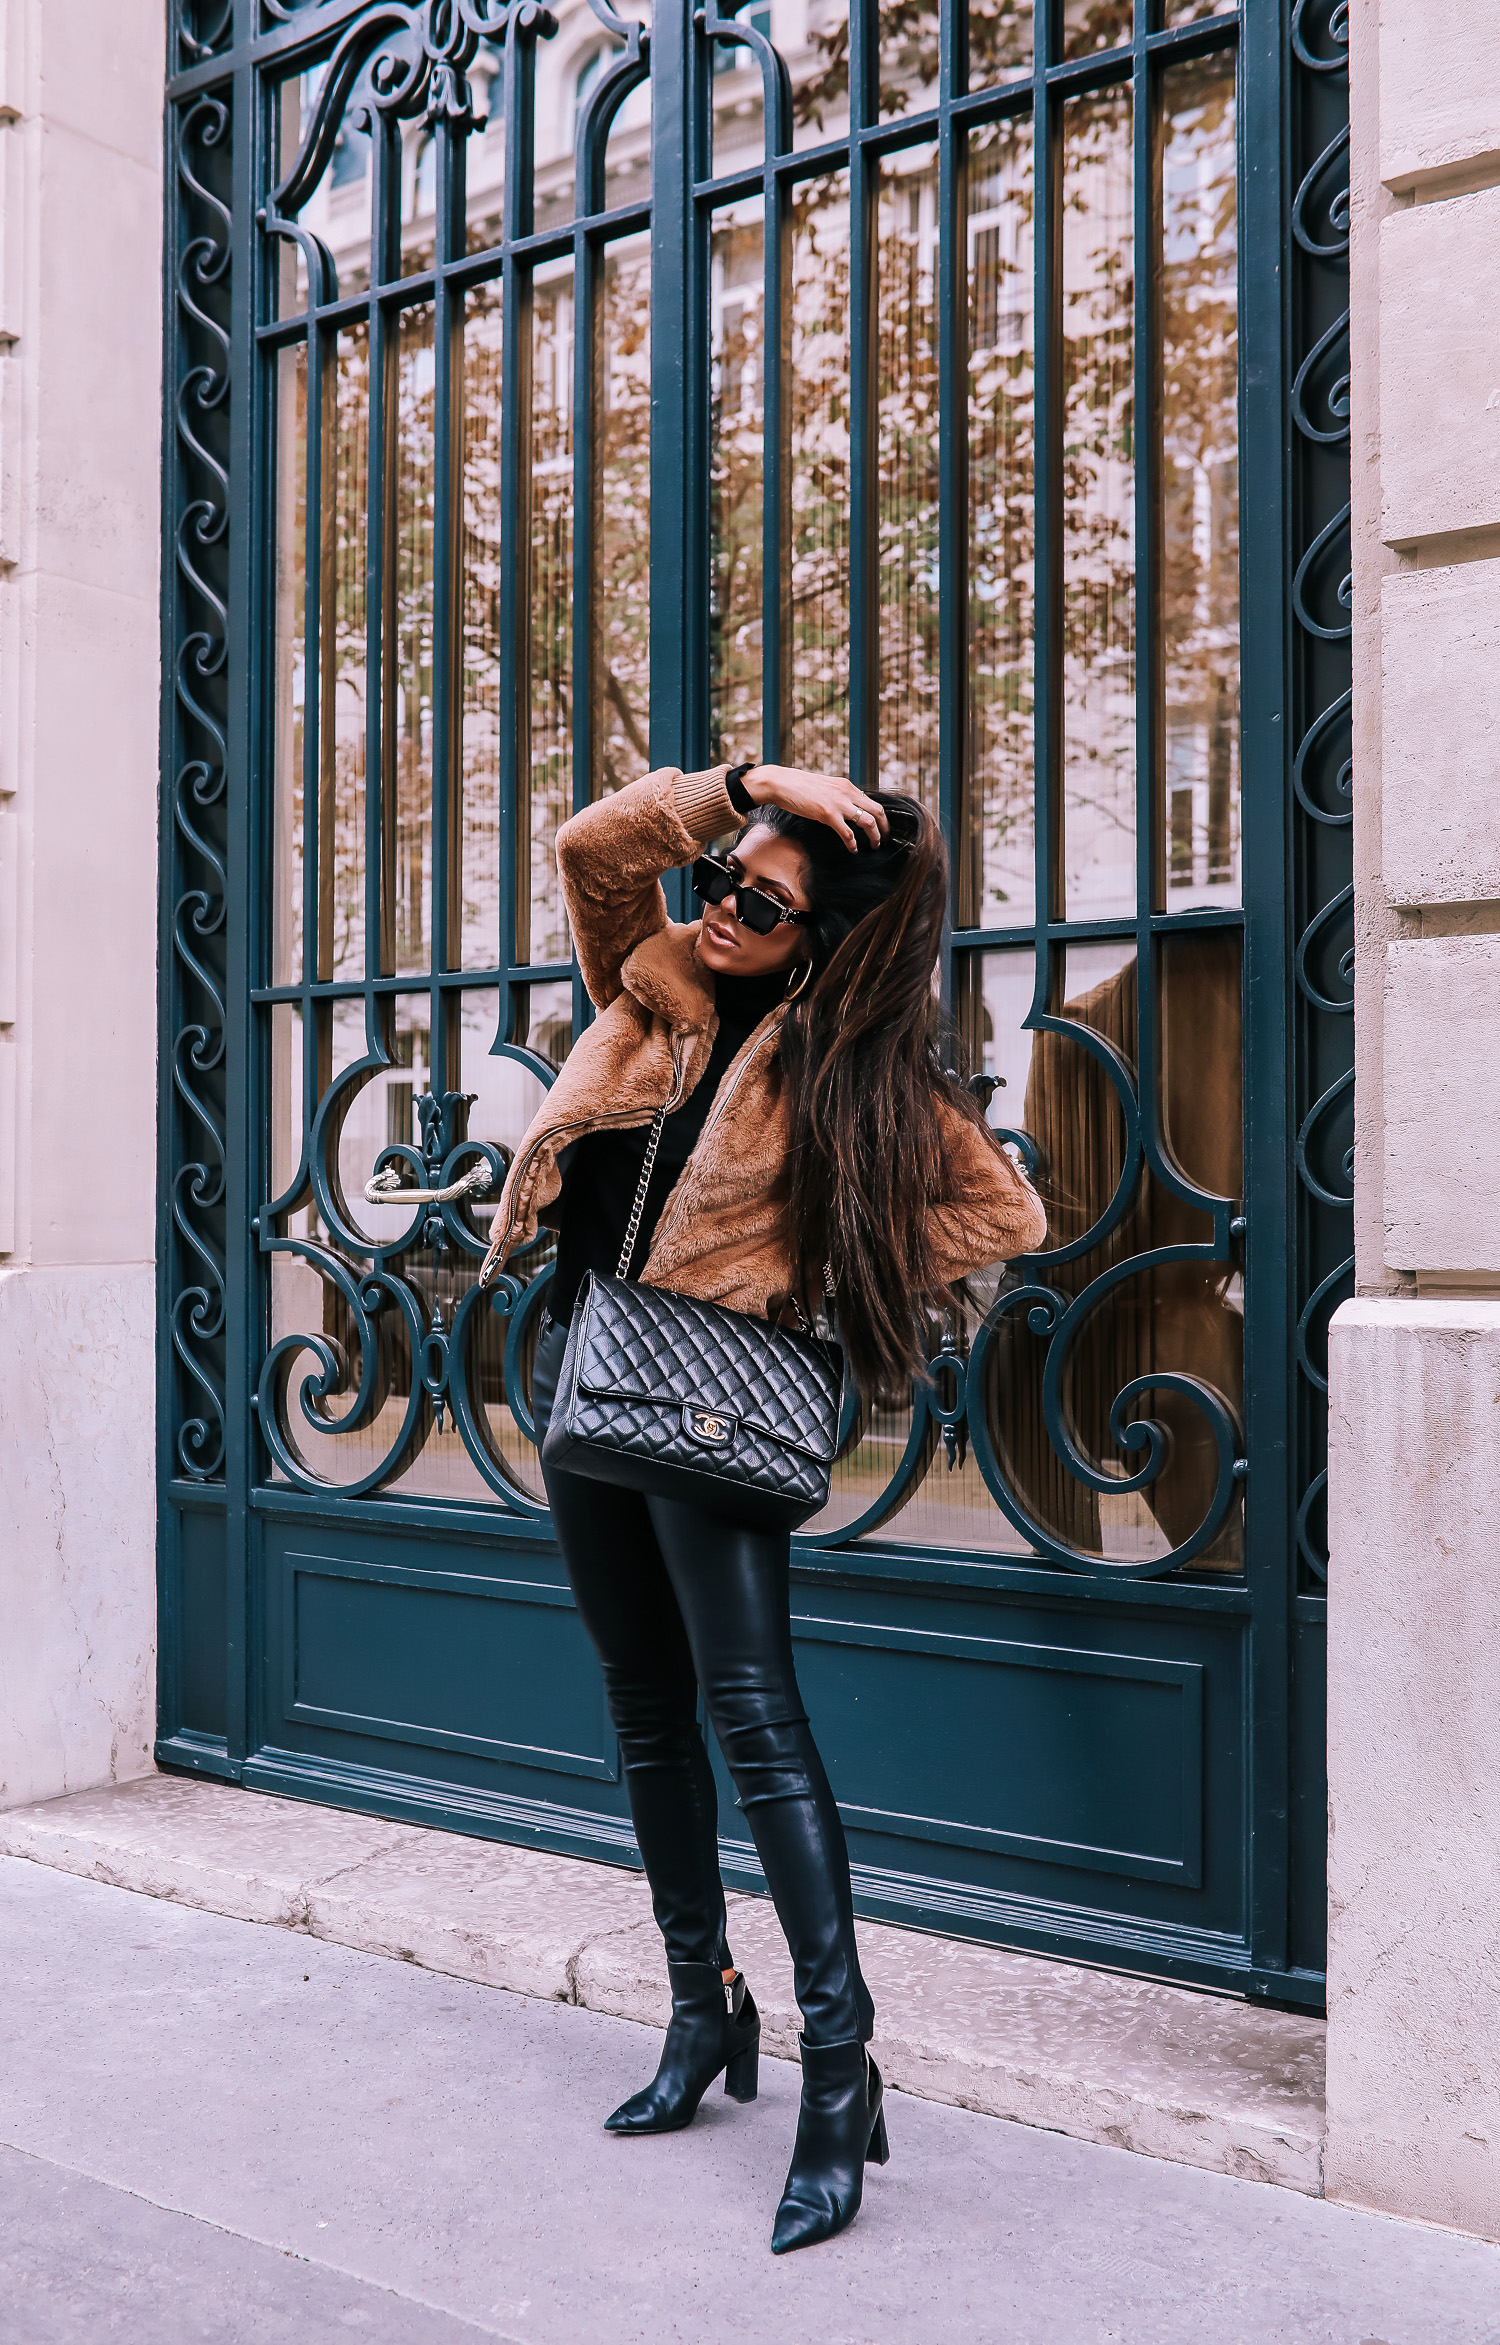 paris fall fashion 2019, fall fashion 2019, banana republic fall outfits 2019, paris outfit ideas fall and winter, what to wear in paris in october november, emily ann gemma-2 | paris fall fashion 2019, fall fashion 2019, banana republic fall outfits 2019, paris outfit ideas fall and winter, what to wear in paris in october november, emily ann gemma-2 | Do You Like Neon Or Neutrals?! Two Everyday Fall Outfits by popular Oklahoma fashion blog, The Sweetest Thing: image of a woman outside in Paris and wearing a Banana Republic Faux Fur Bomber, Banana Republic Merino-Blend Funnel-Neck Sweater, and Banana Republic High-Rise Skinny Coated Jean.